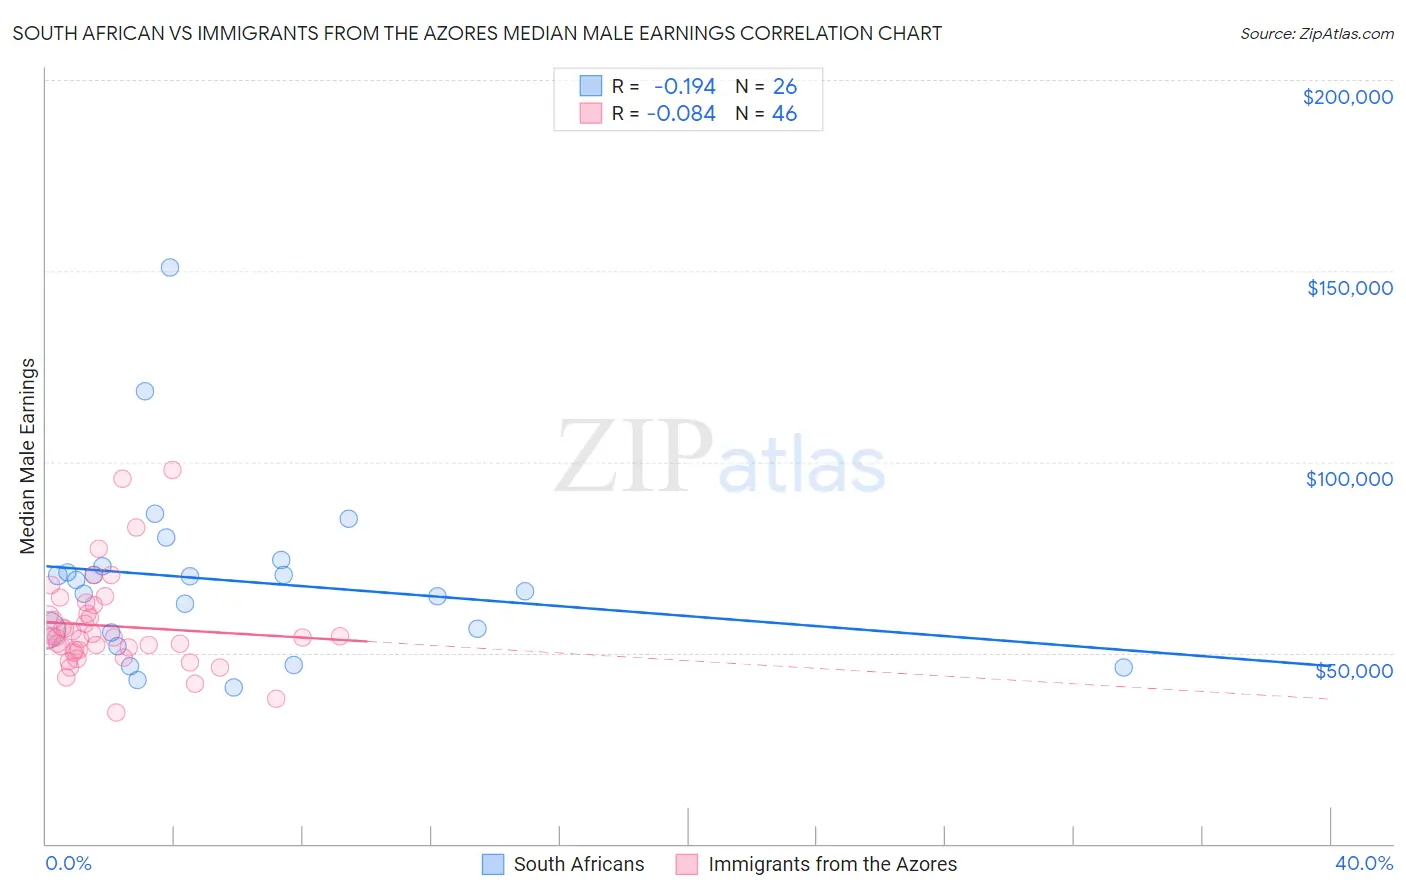 South African vs Immigrants from the Azores Median Male Earnings